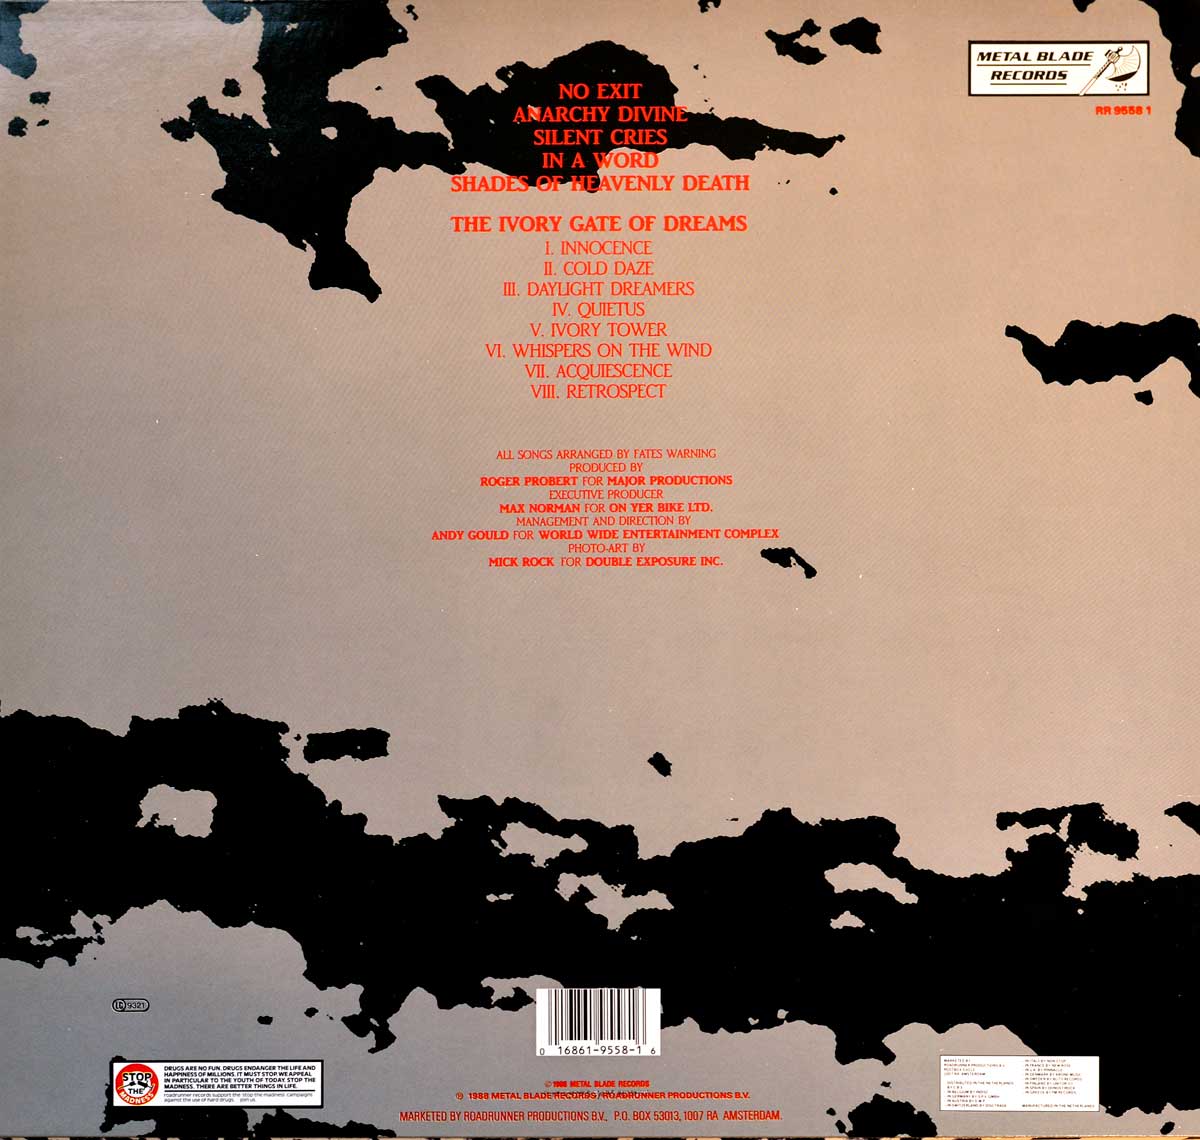 High Resolution Photo Album Back Cover of FATES WARNING No Exit https://vinyl-records.nl